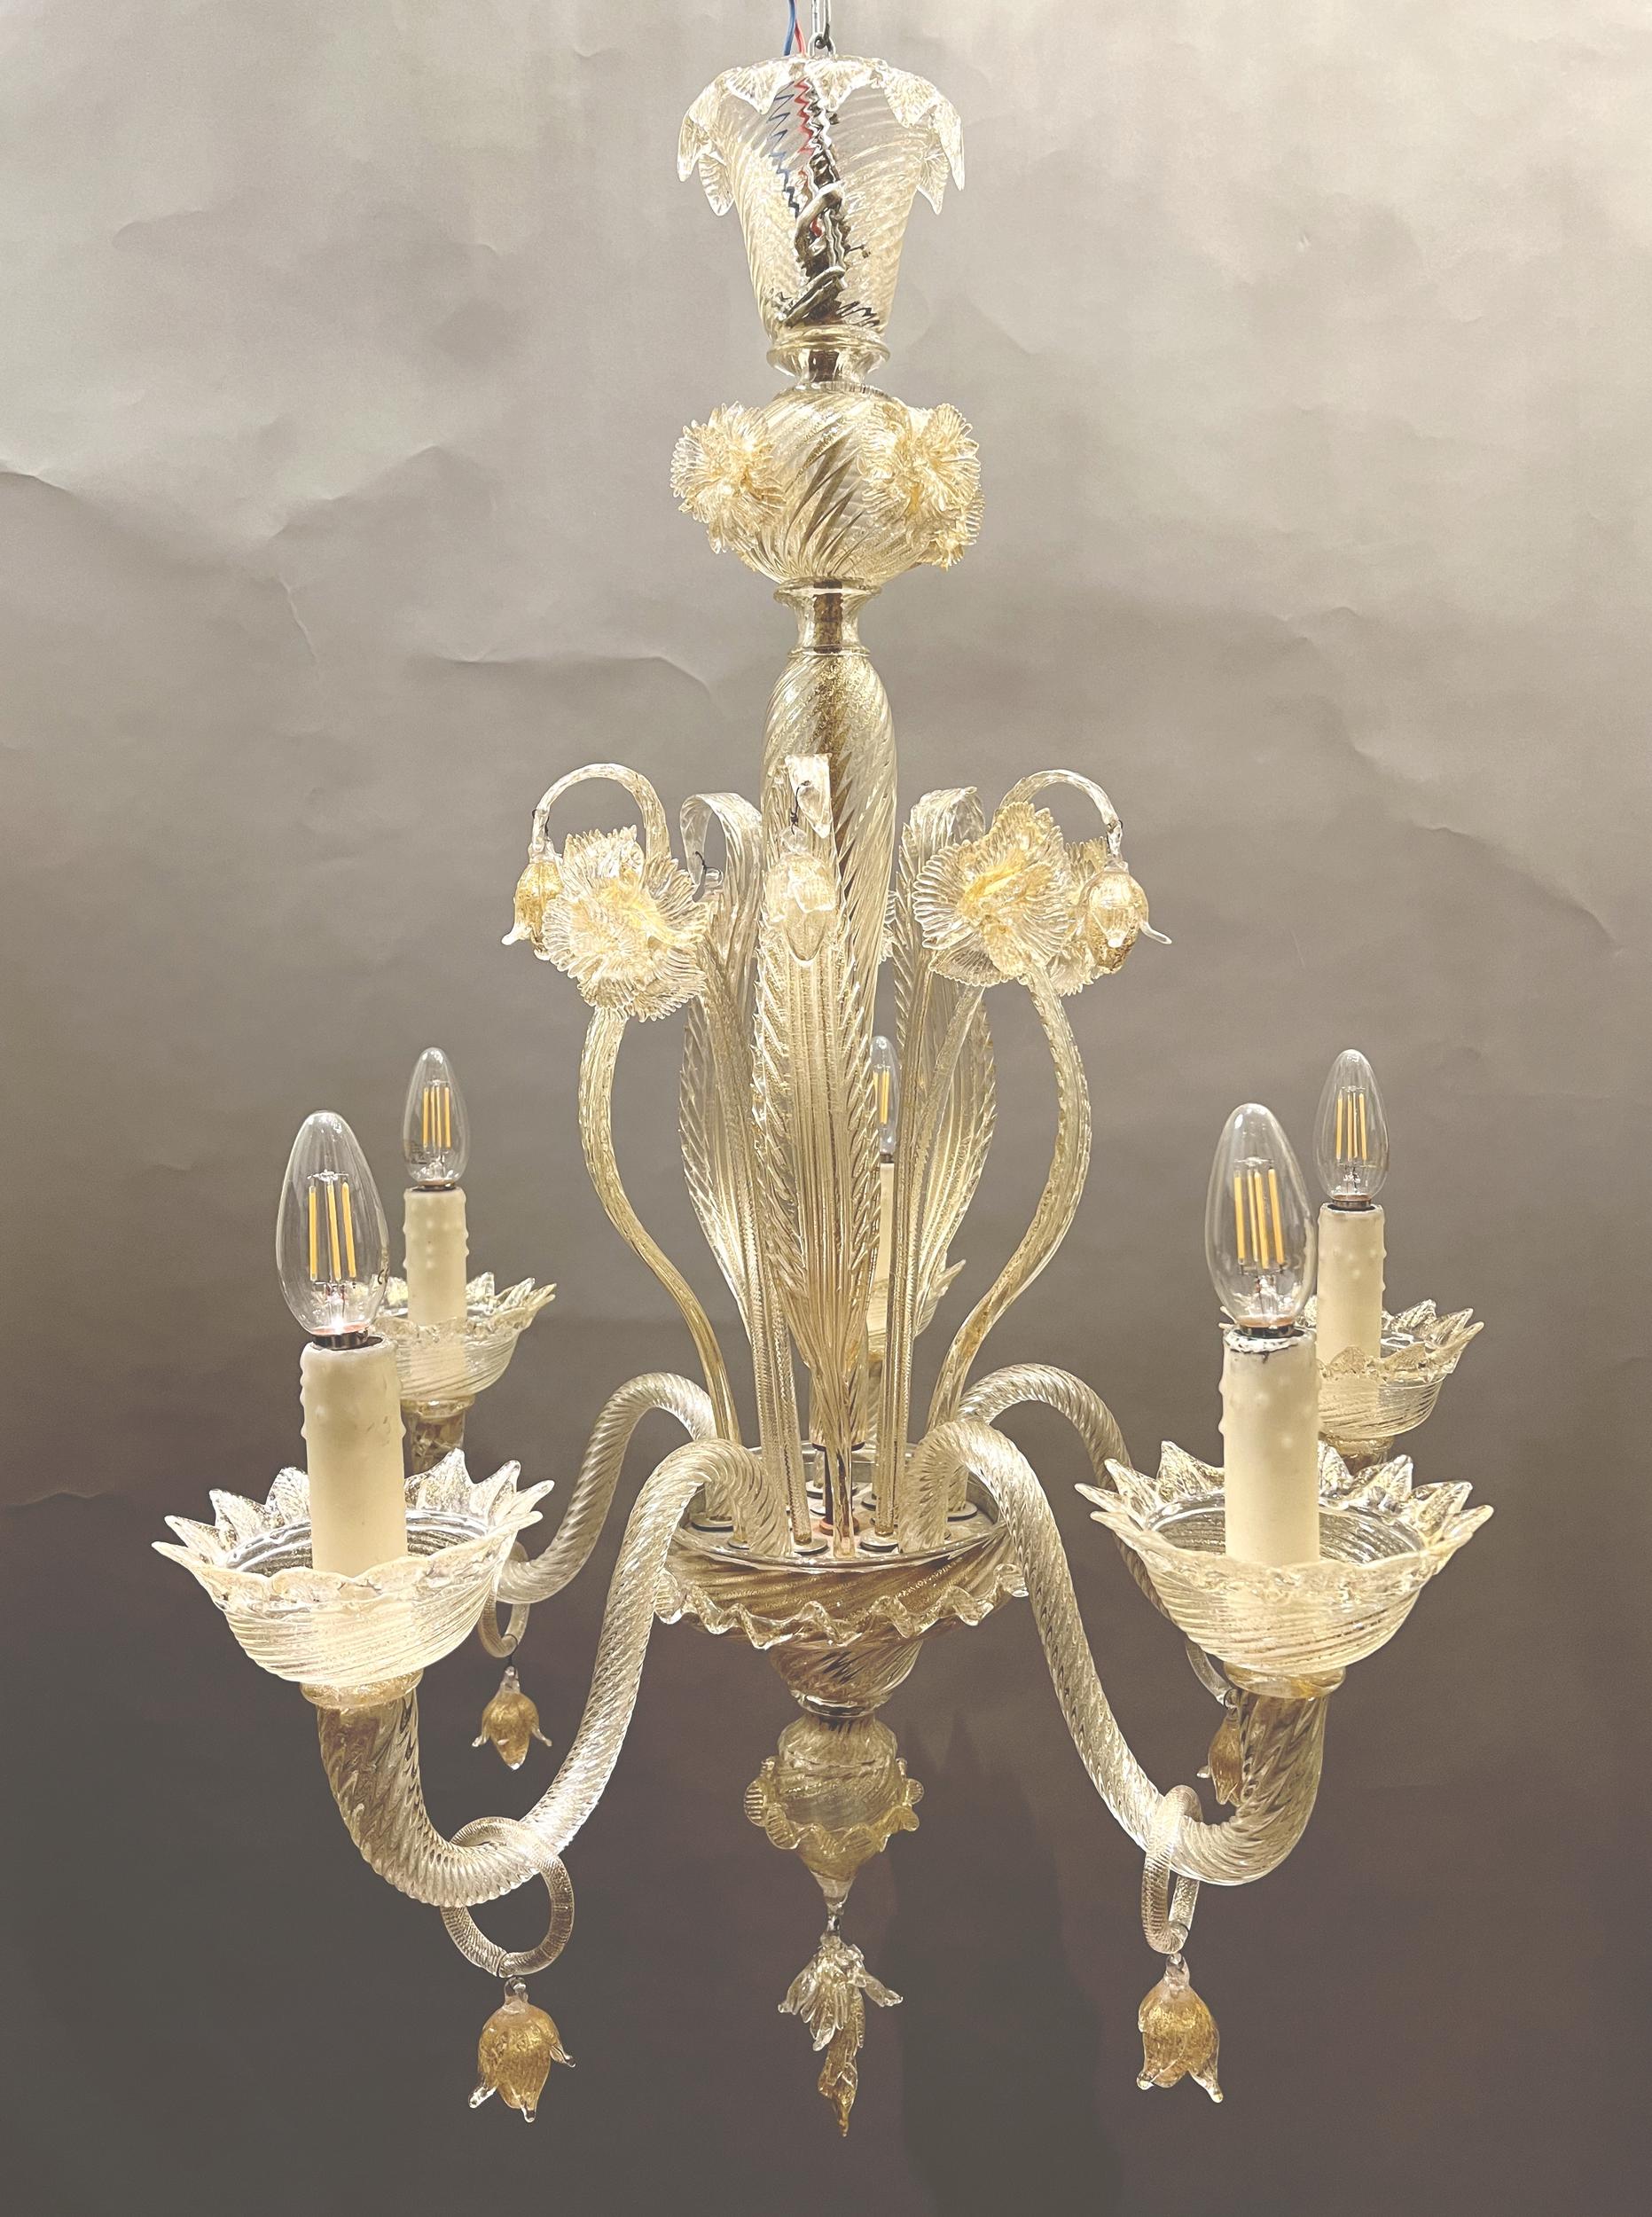 Pair of chandeliers in blown glass with gold inclusions, Murano, Italy, decorated with leaves and daffodils. Five arms of light.